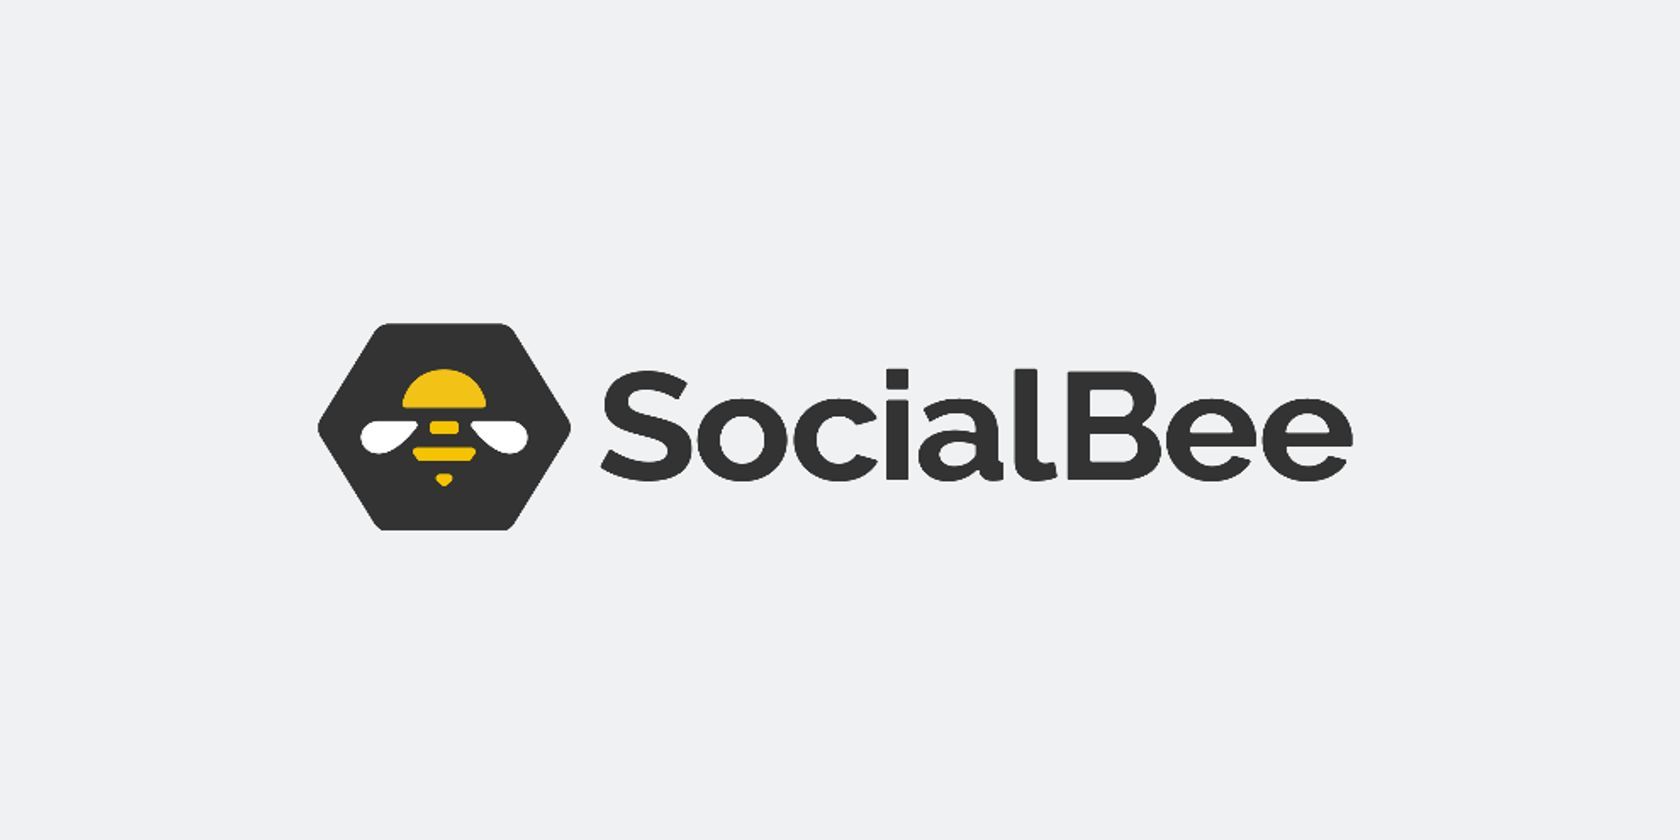 Image of SocialBee logo on a white background